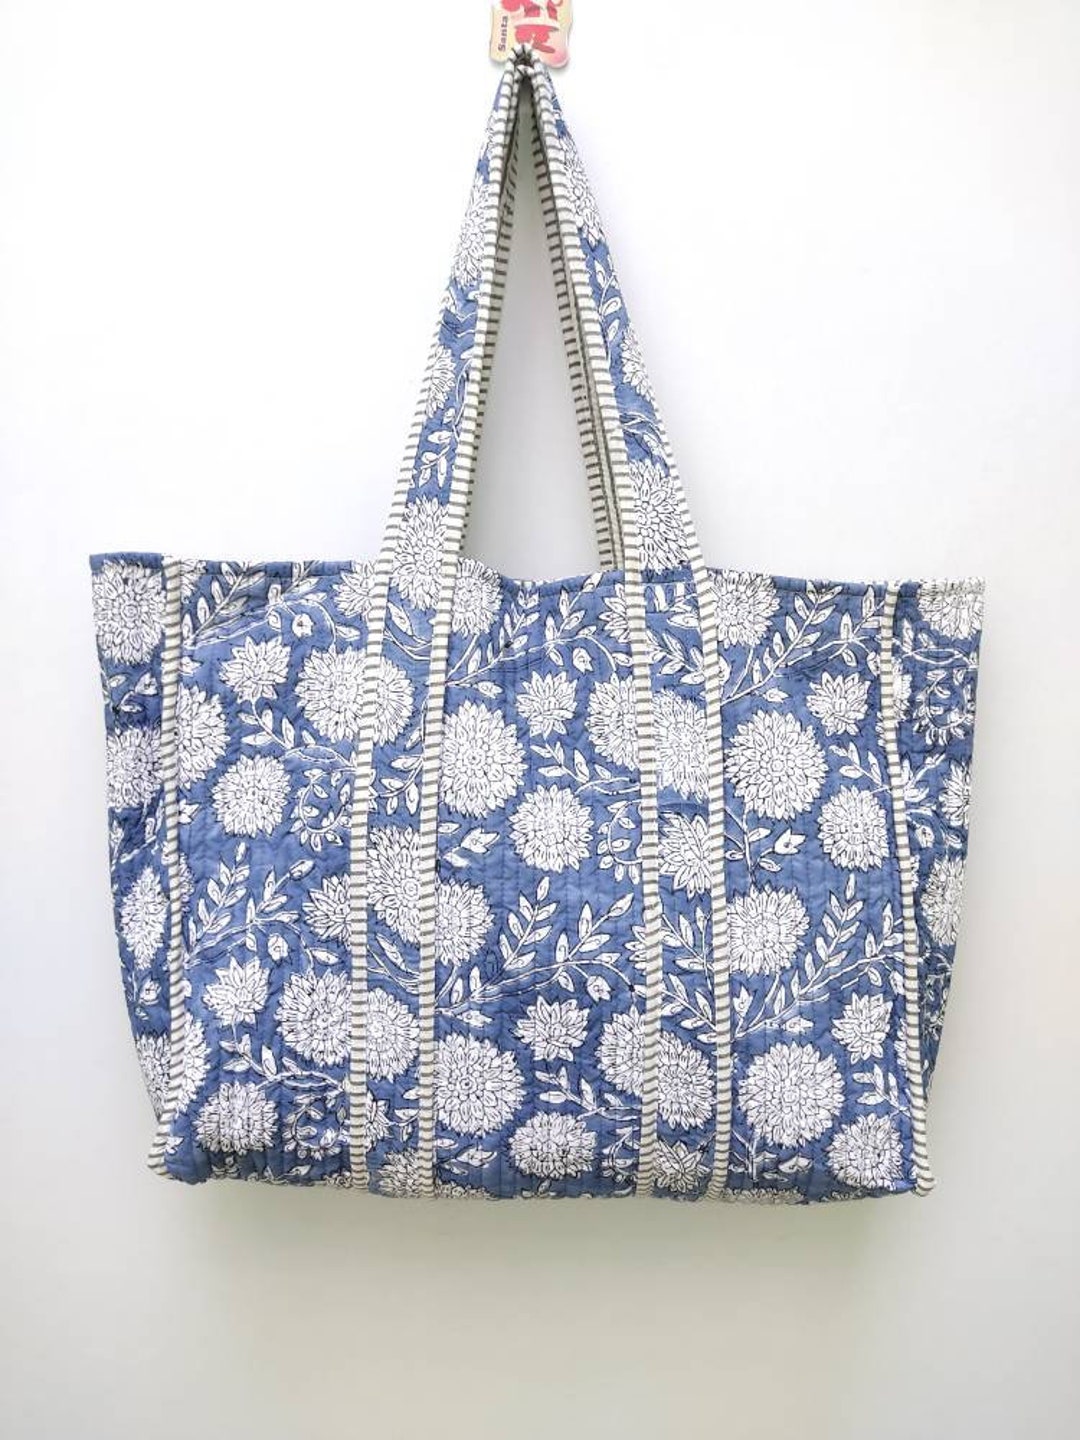 Handmade Quilted Tote Shopping Bag Block Print Cotton Market - Etsy